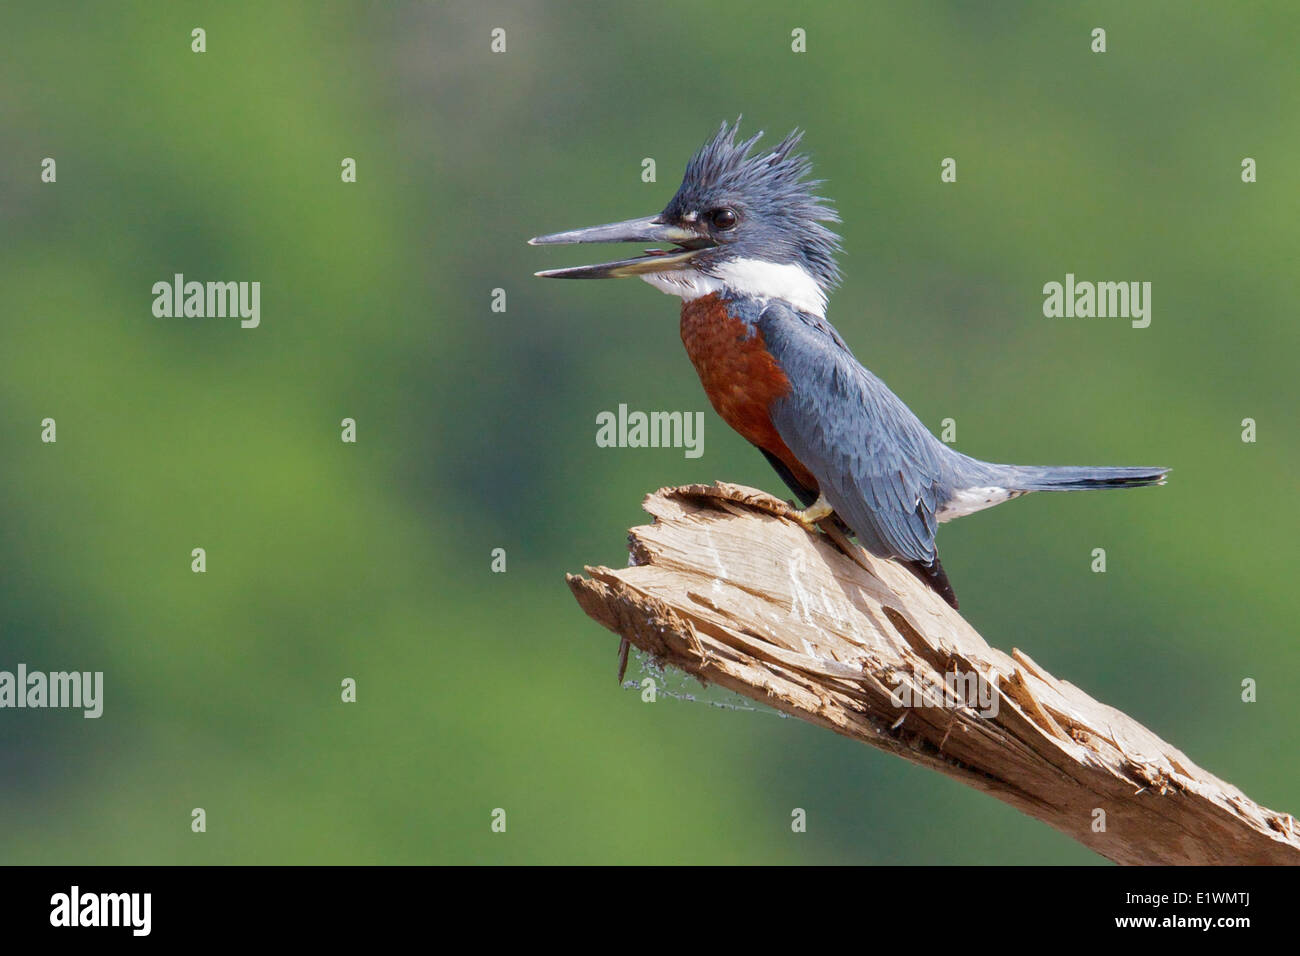 Ringed Kingfisher (Ceryle torquata) perched on a branch in Costa Rica, Central America. Stock Photo